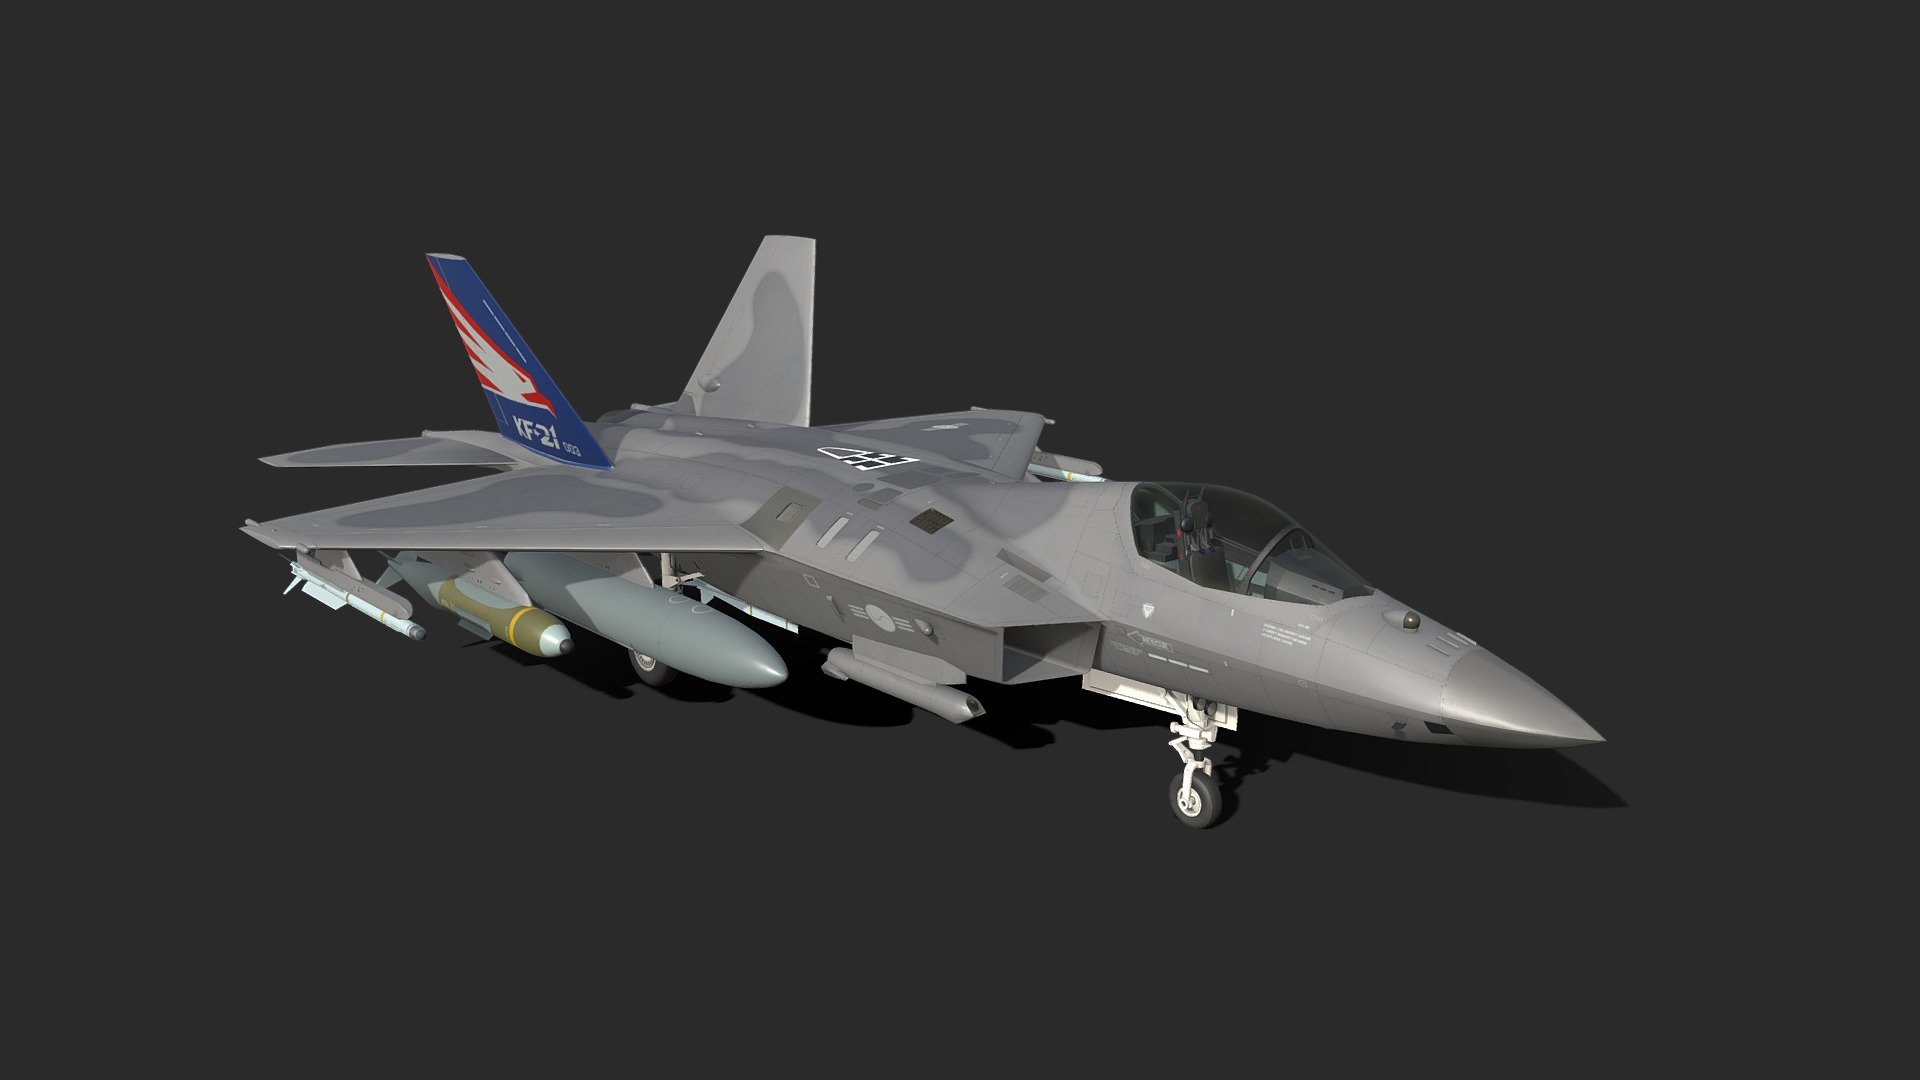 The KAI KF-21 Boramae (formerly known as KF-X) is a South Korean fighter aircraft development program, with Indonesian involvement, with the goal of producing an advanced multirole fighter for the South Korean and Indonesian air forces. The airframe is stealthier than any fourth-generation fighter, but does not carry weapons in internal bays like fifth-generation fighters, though internal bays may be introduced later in development.

In April 2021, the first prototype was completed and unveiled during a rollout ceremony at the headquarters of KAI at Sacheon Airport.[6] It was officially given the name Boramae (Translates to: &lsquo;young hawk' or &lsquo;fighting hawk'). The first test flight was conducted on 19 July 2022, with manufacturing scheduled to begin in 2026. At least 40 aircraft are planned to be delivered by 2028, with South Korea expecting to deploy a total of 120 of the aircraft by 2032. It will also be available for export market - KAI KF-21 Boramae - 3D model by Tim_samedov 3d model